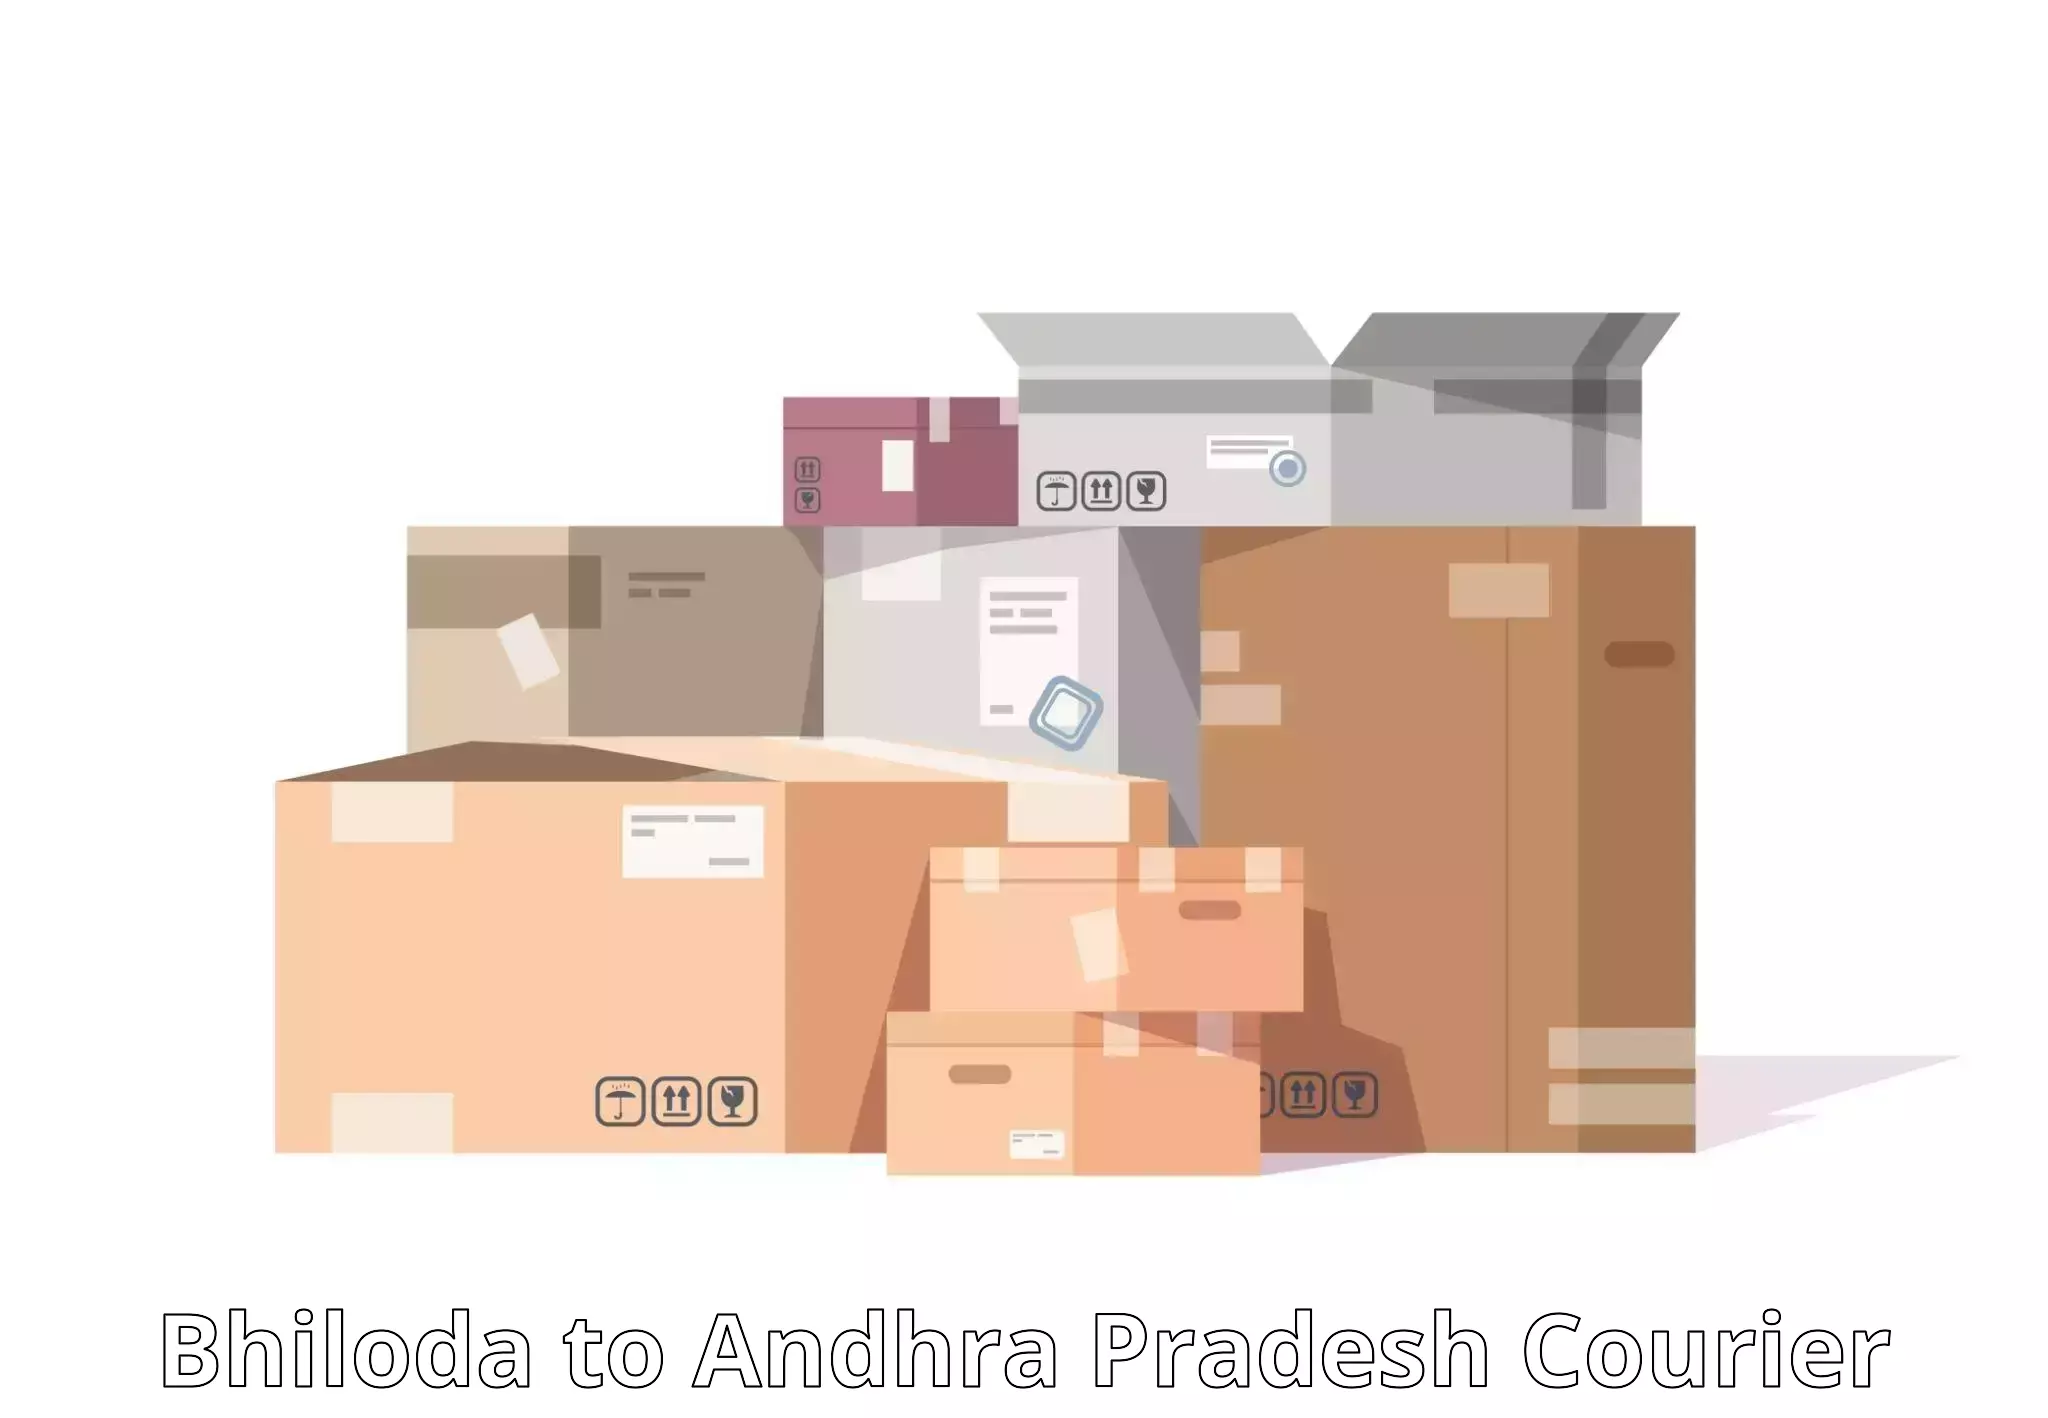 Large package courier Bhiloda to Pedapadu